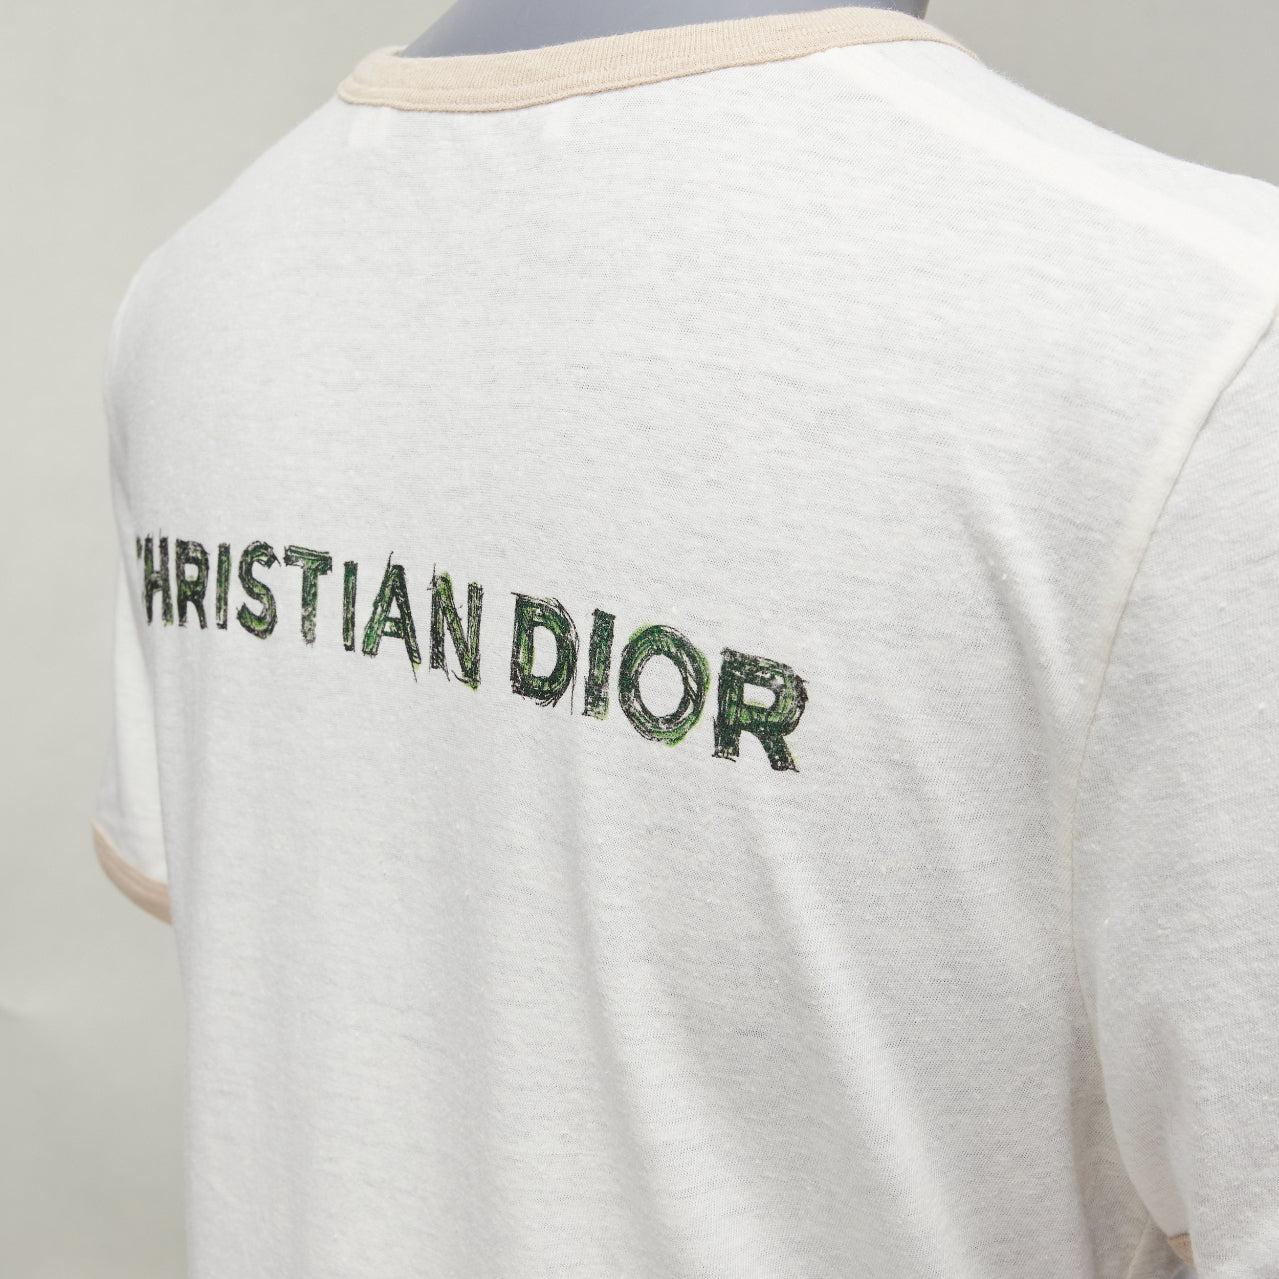 CHRISTIAN DIOR Princess and Dragon green cream beige foil print ringer tshirt XS
Reference: AAWC/A00789
Brand: Dior
Designer: Maria Grazia Chiuri
Material: Cotton, Linen
Color: Cream, Green
Pattern: Abstract
Closure: Pull On
Extra Details: CHRISTIAN